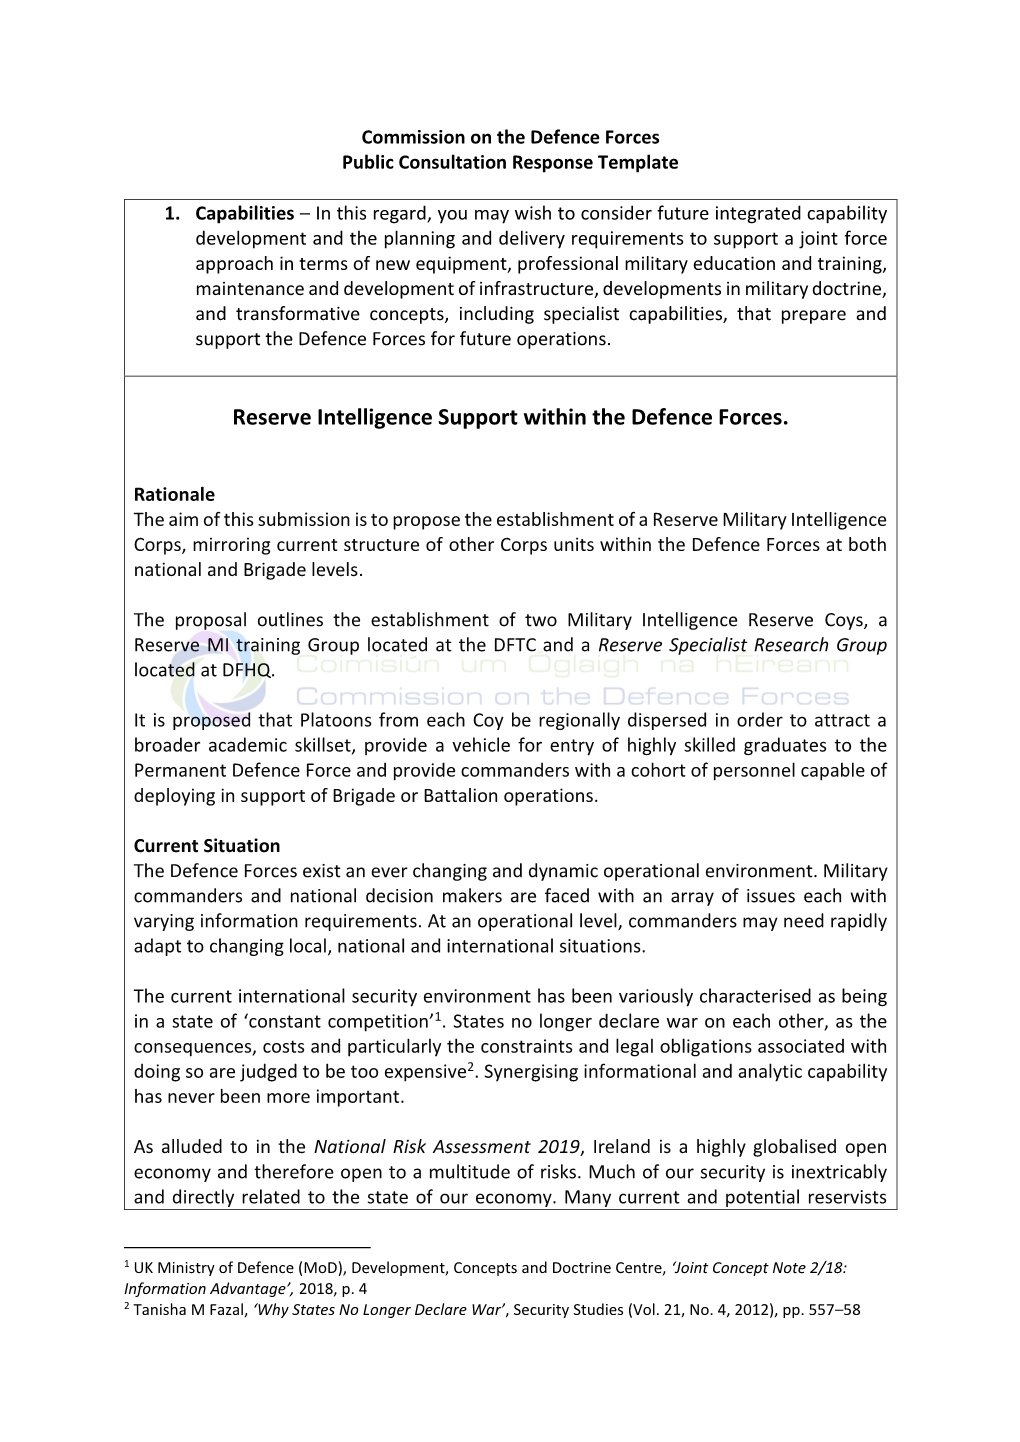 Reserve Intelligence Support Within the Defence Forces